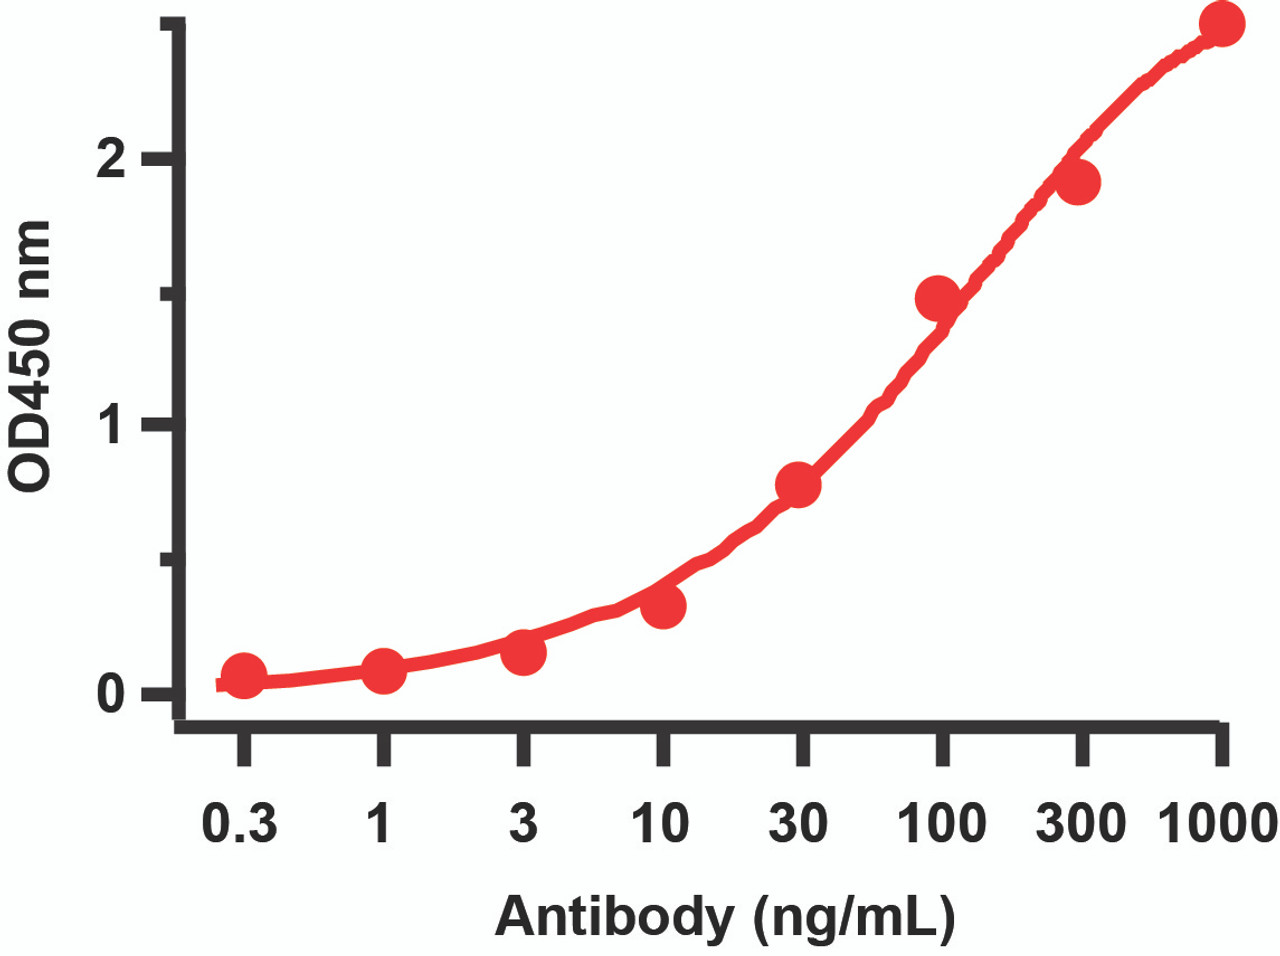 Figure 1 ELISA Validation 
Antibodies: SARS-CoV-2 (COVID-19) NSP14 (ExoN) Antibody, 9187. A sandwich ELISA was performed using immunogen or peptide (9187P) as coating antigen and the anti-SARS-CoV-2 (COVID-19) NSP14 (ExoN) antibody as the capture antibody. Secondary: Goat anti-rabbit IgG HRP conjugate at 1:20000 dilution. Detection range is from 0.3 ng/mL to 1000ng/mL.